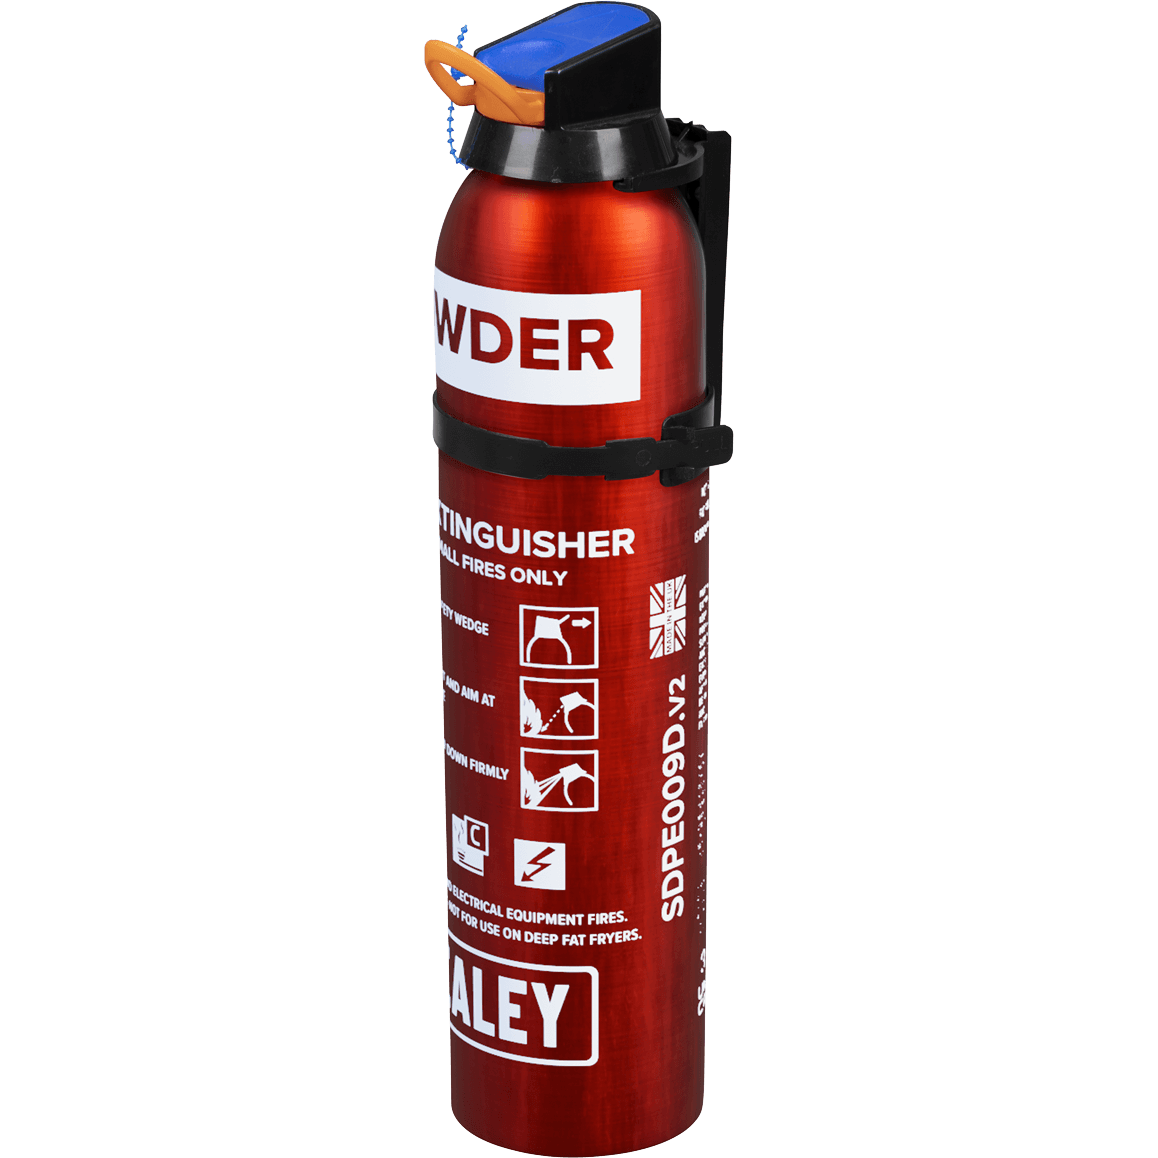 Photos - Fire Extinguisher Sealey Disposable Dry Power  950g SDPE009D 